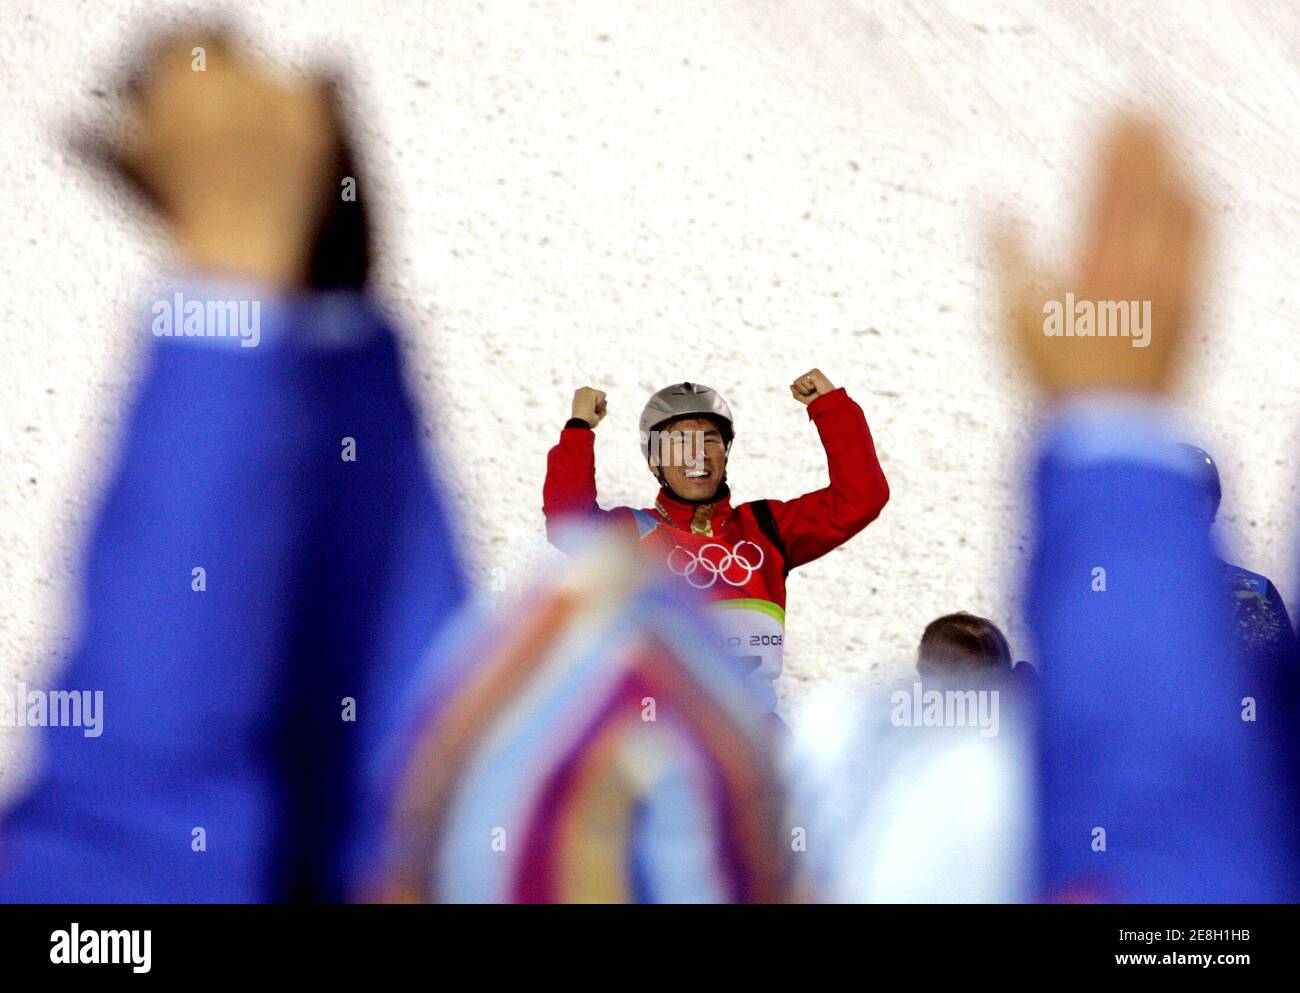 Han Xiaopeng of China celebrates during the final of the men's aerials freestyle competition at the Torino 2006 Winter Olympic Games in Sauze d?Oulx, Italy February 23, 2006.     REUTERS/Pascal Lauener Stock Photo